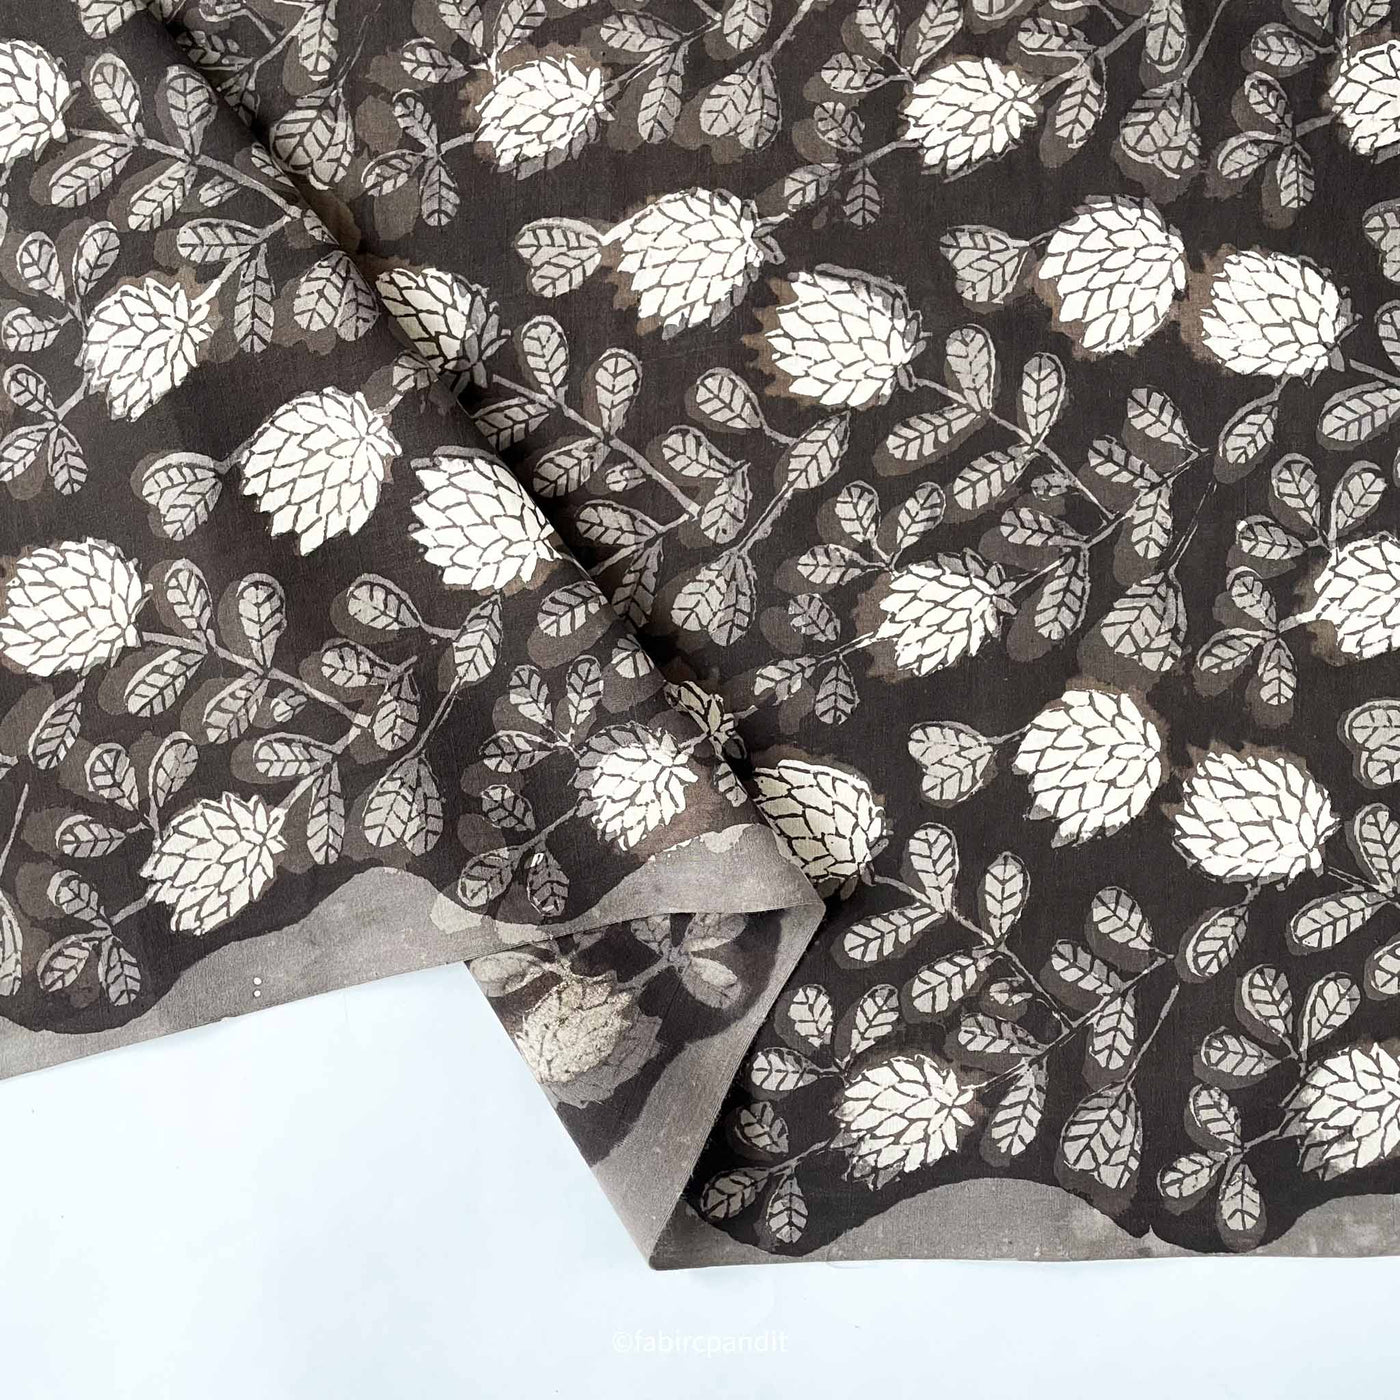 Fabric Pandit Fabric Deep Brown Indigo Dabu Natural Dyed Autumn Leaves Hand Block Printed Pure Cotton Fabric (Width 43 inches)